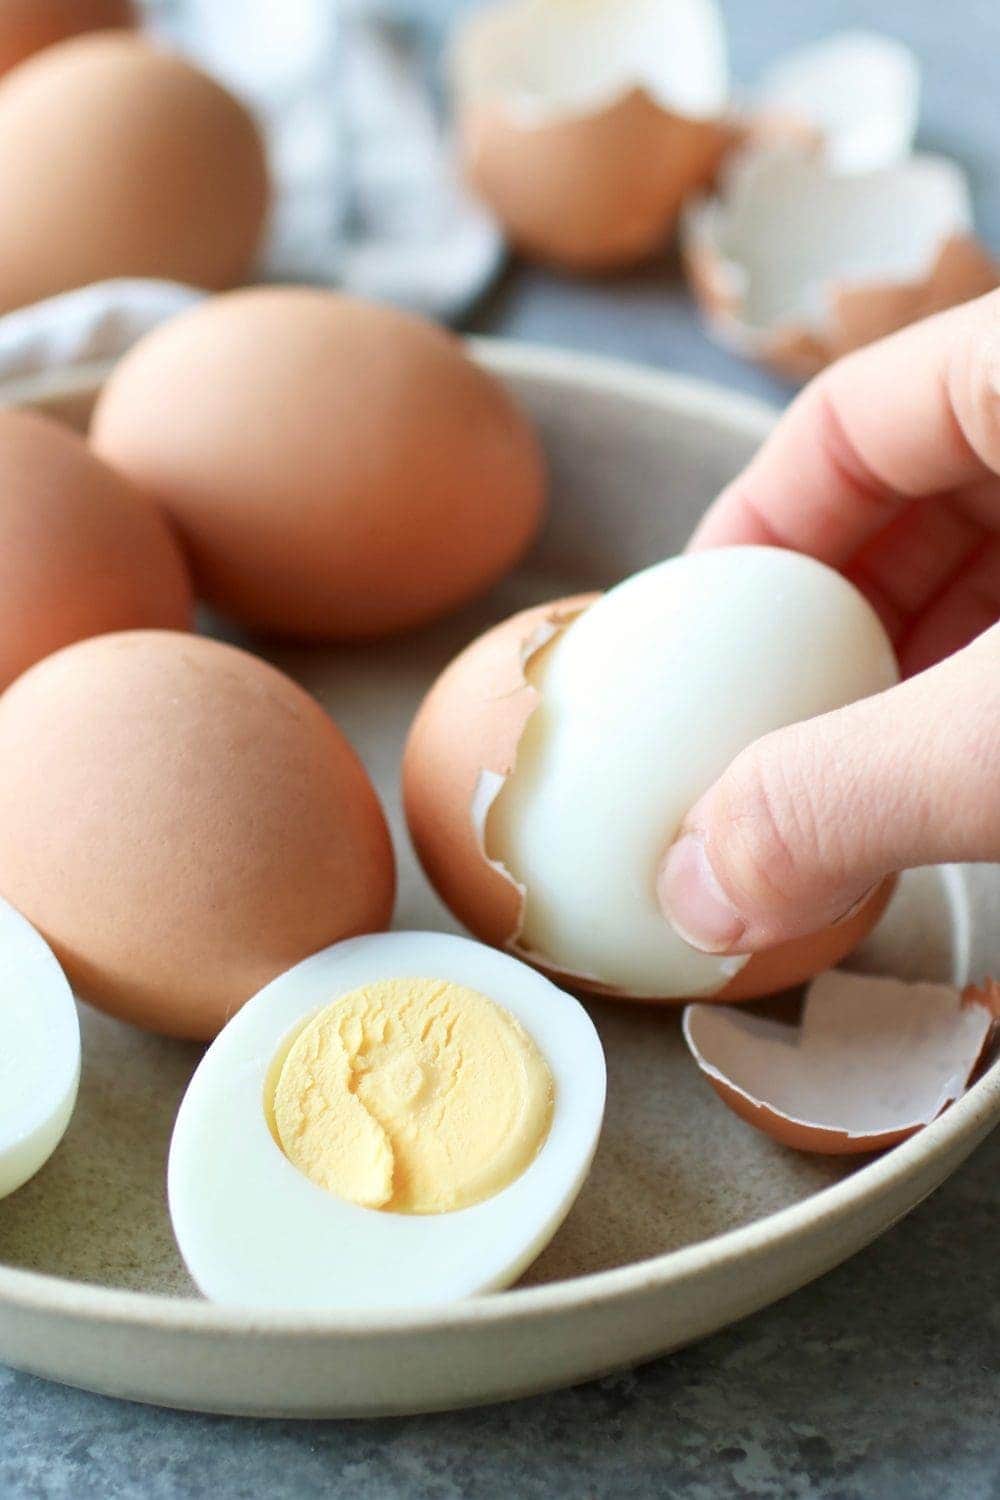 A hard-boiled egg being removed from the brown shell on a plate along with brown eggs and a hard-boiled egg cut in half. 